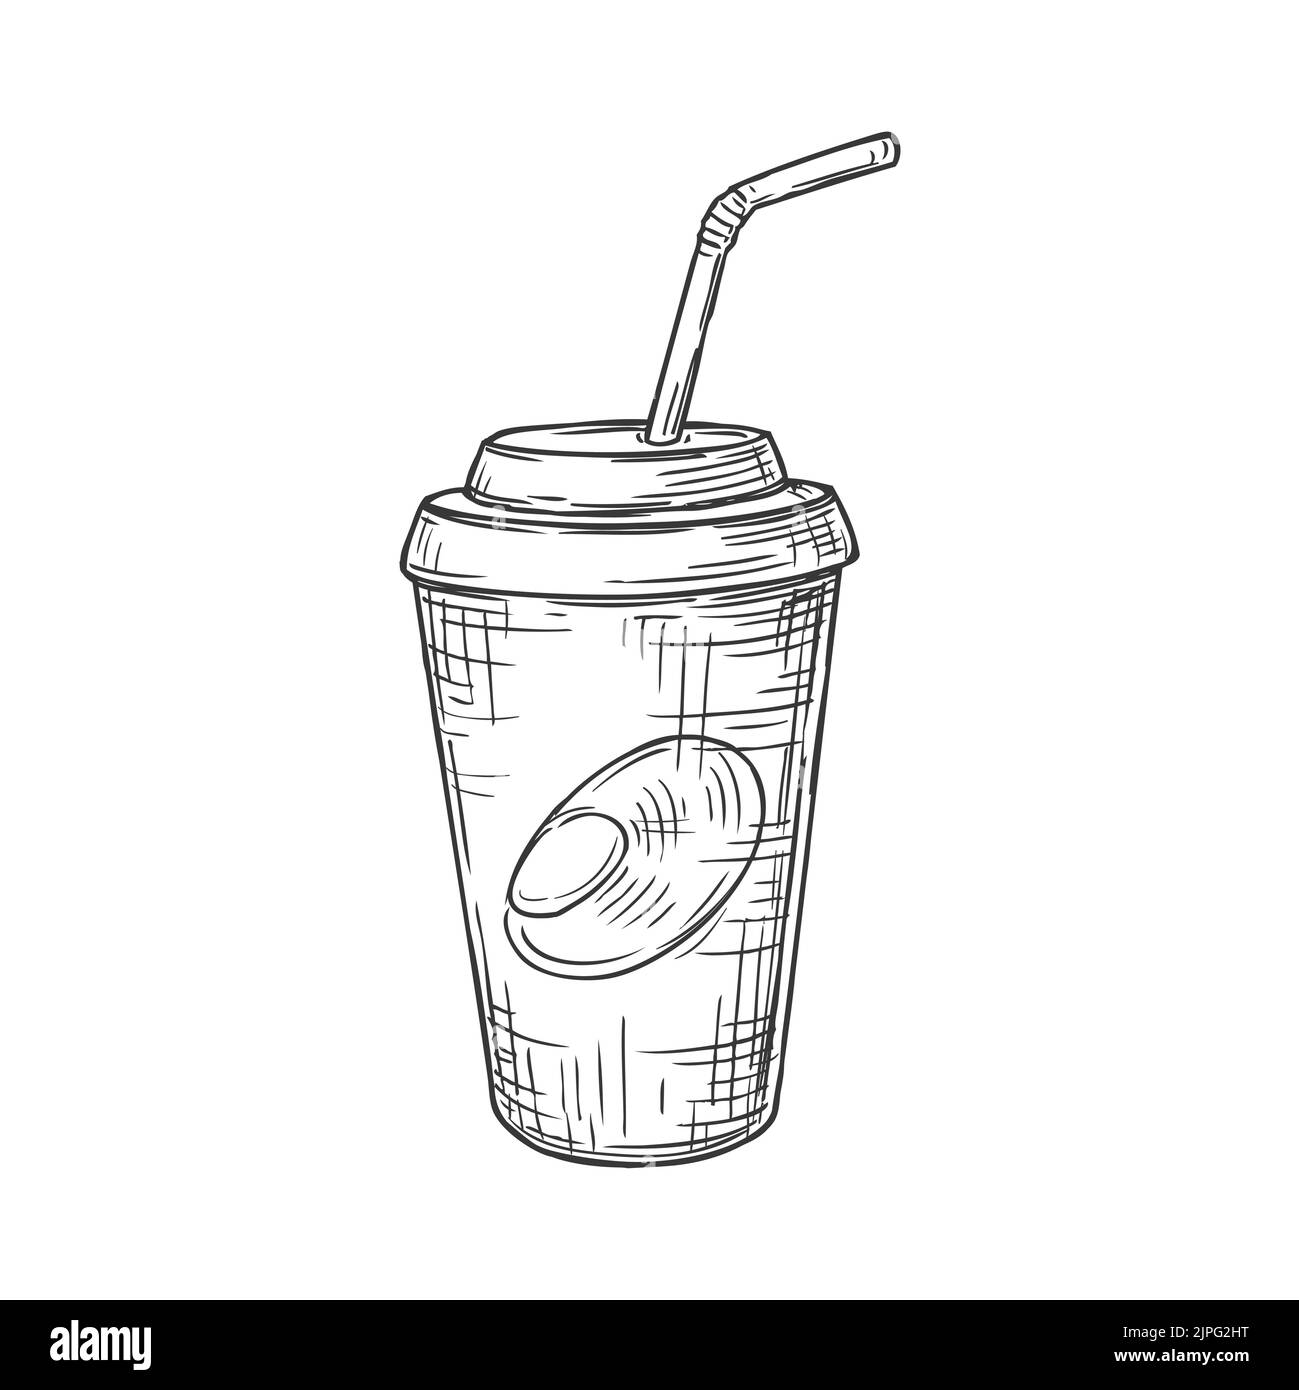 Paper Disposable Cup Lid Drinking Straw Cold Beverage Soda Ice Stock Vector  by ©RaZalina 546300526